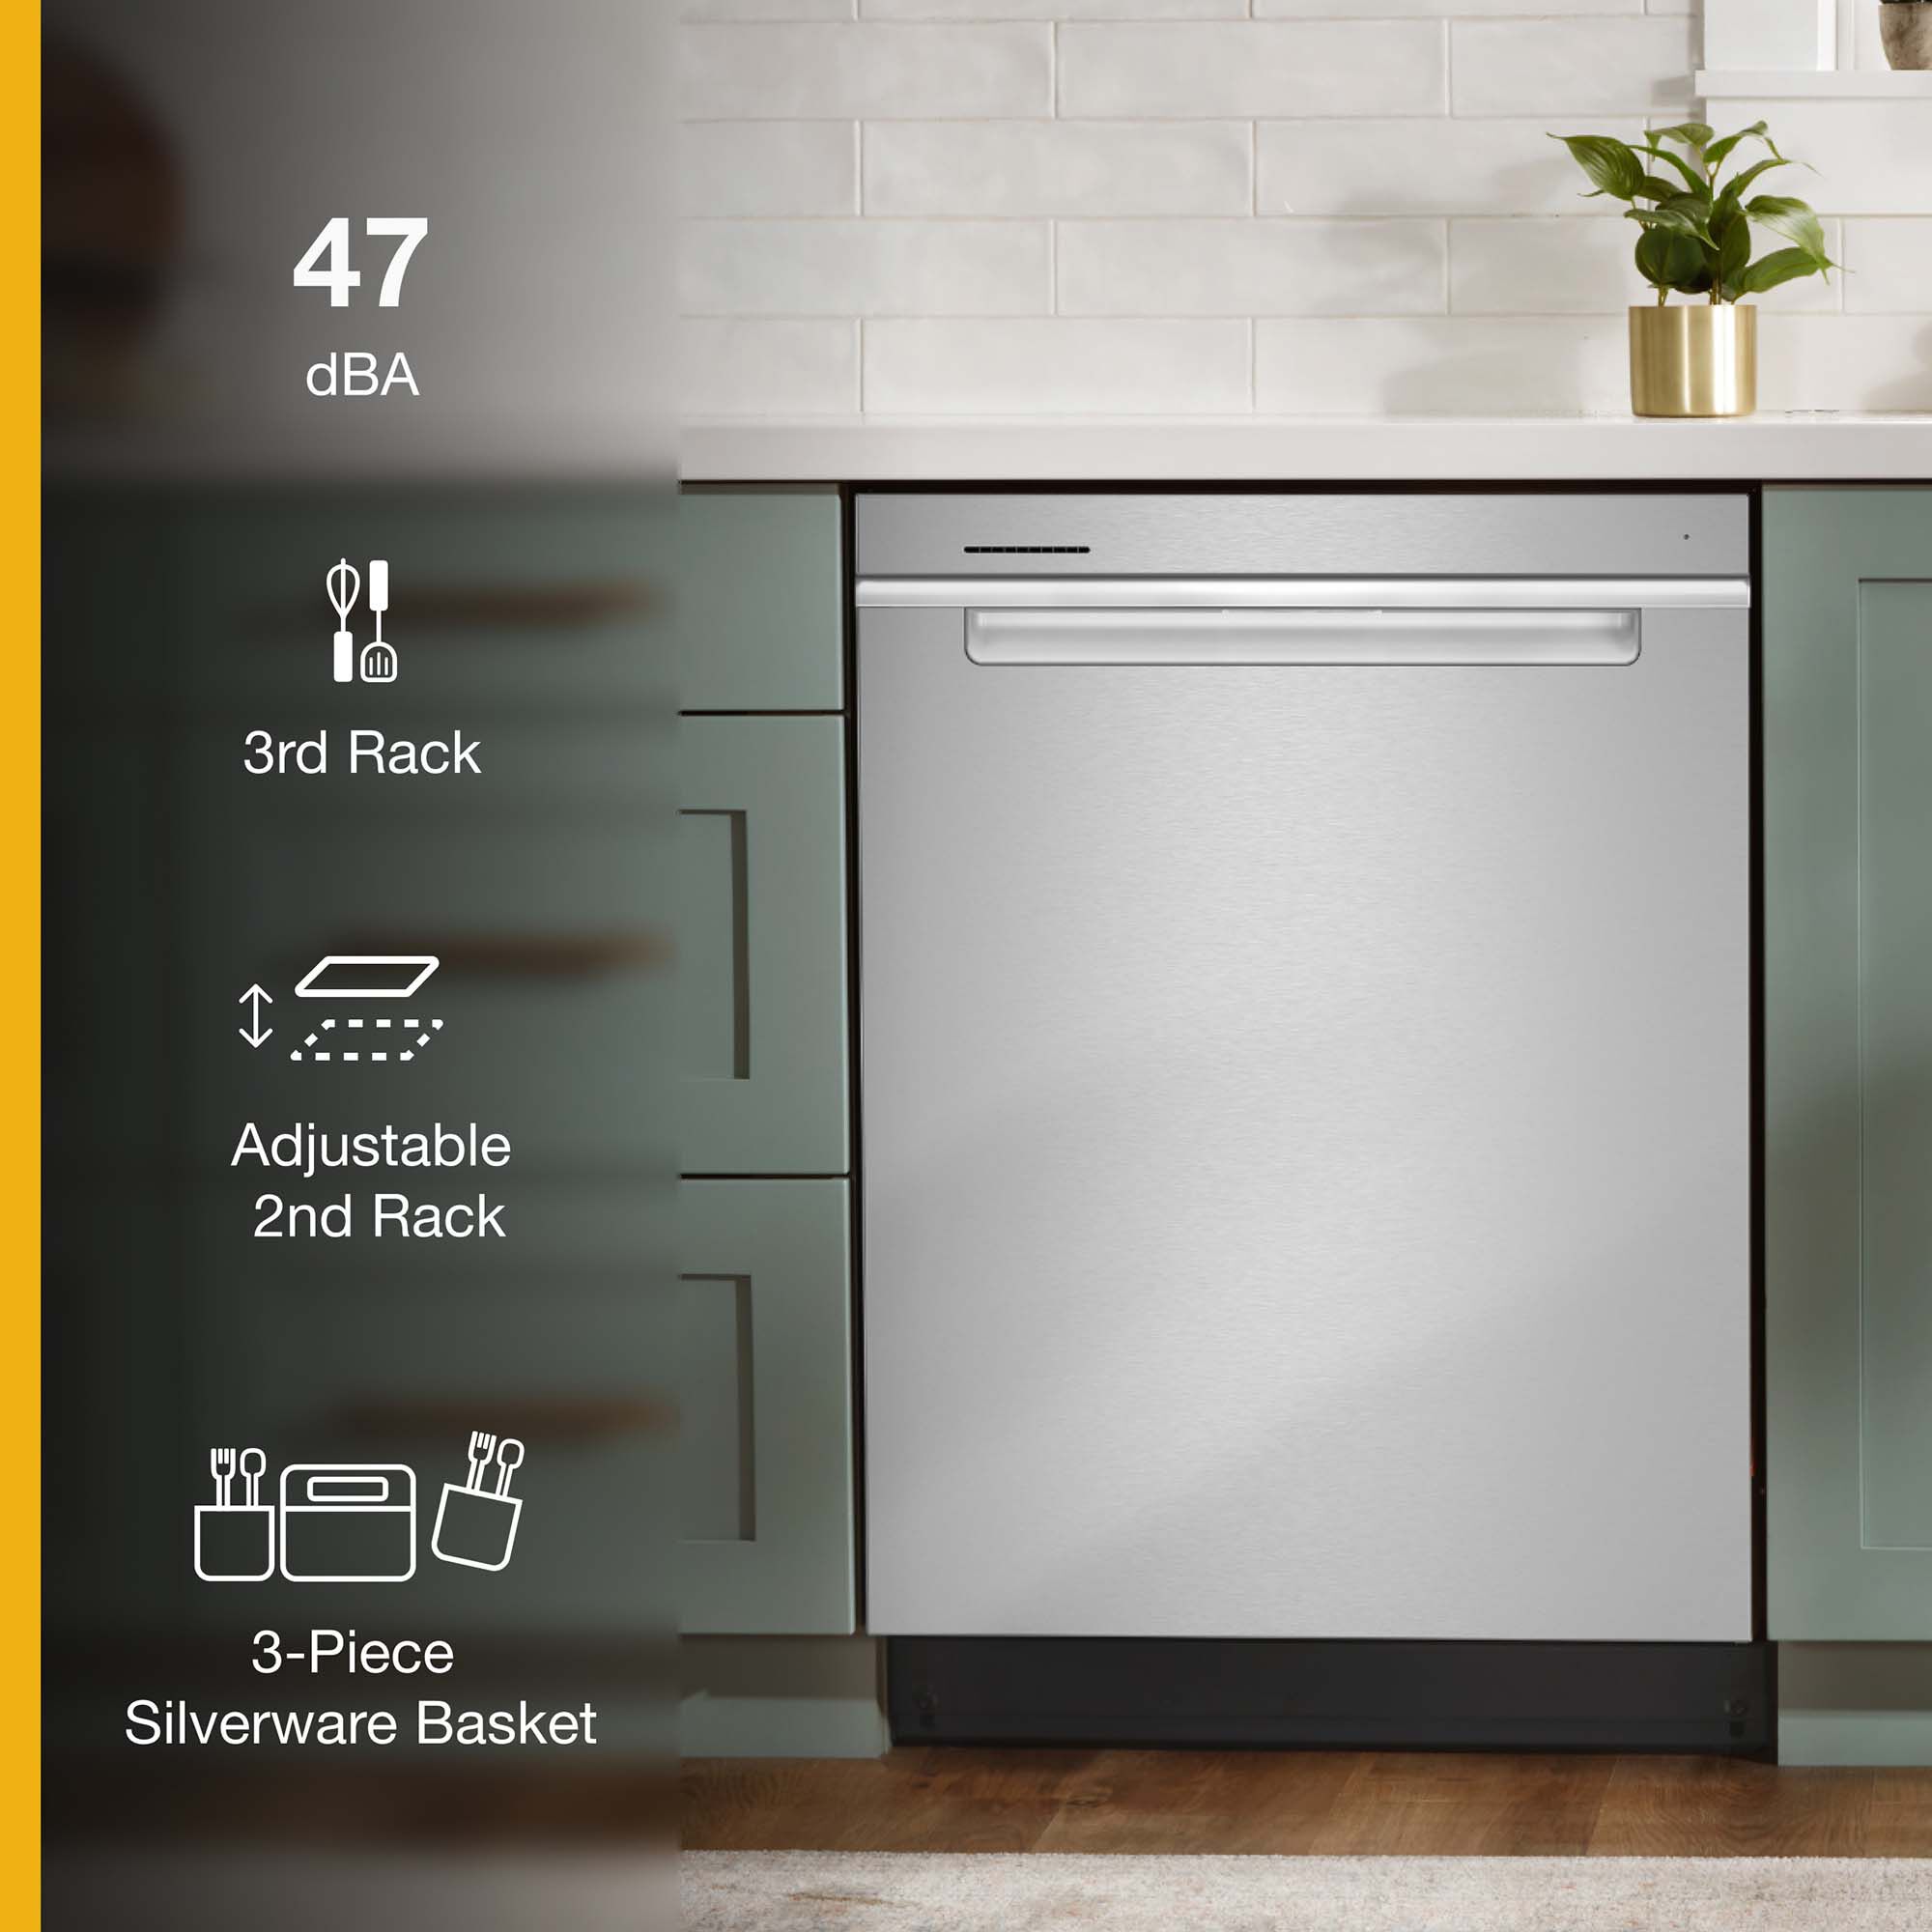 Whirlpool 24 in. Built-In Dishwasher with Top Control, 47 dBA Sound Level,  13 Place Settings, 5 Wash Cycles & Sanitize Cycle - Fingerprint Resistant  